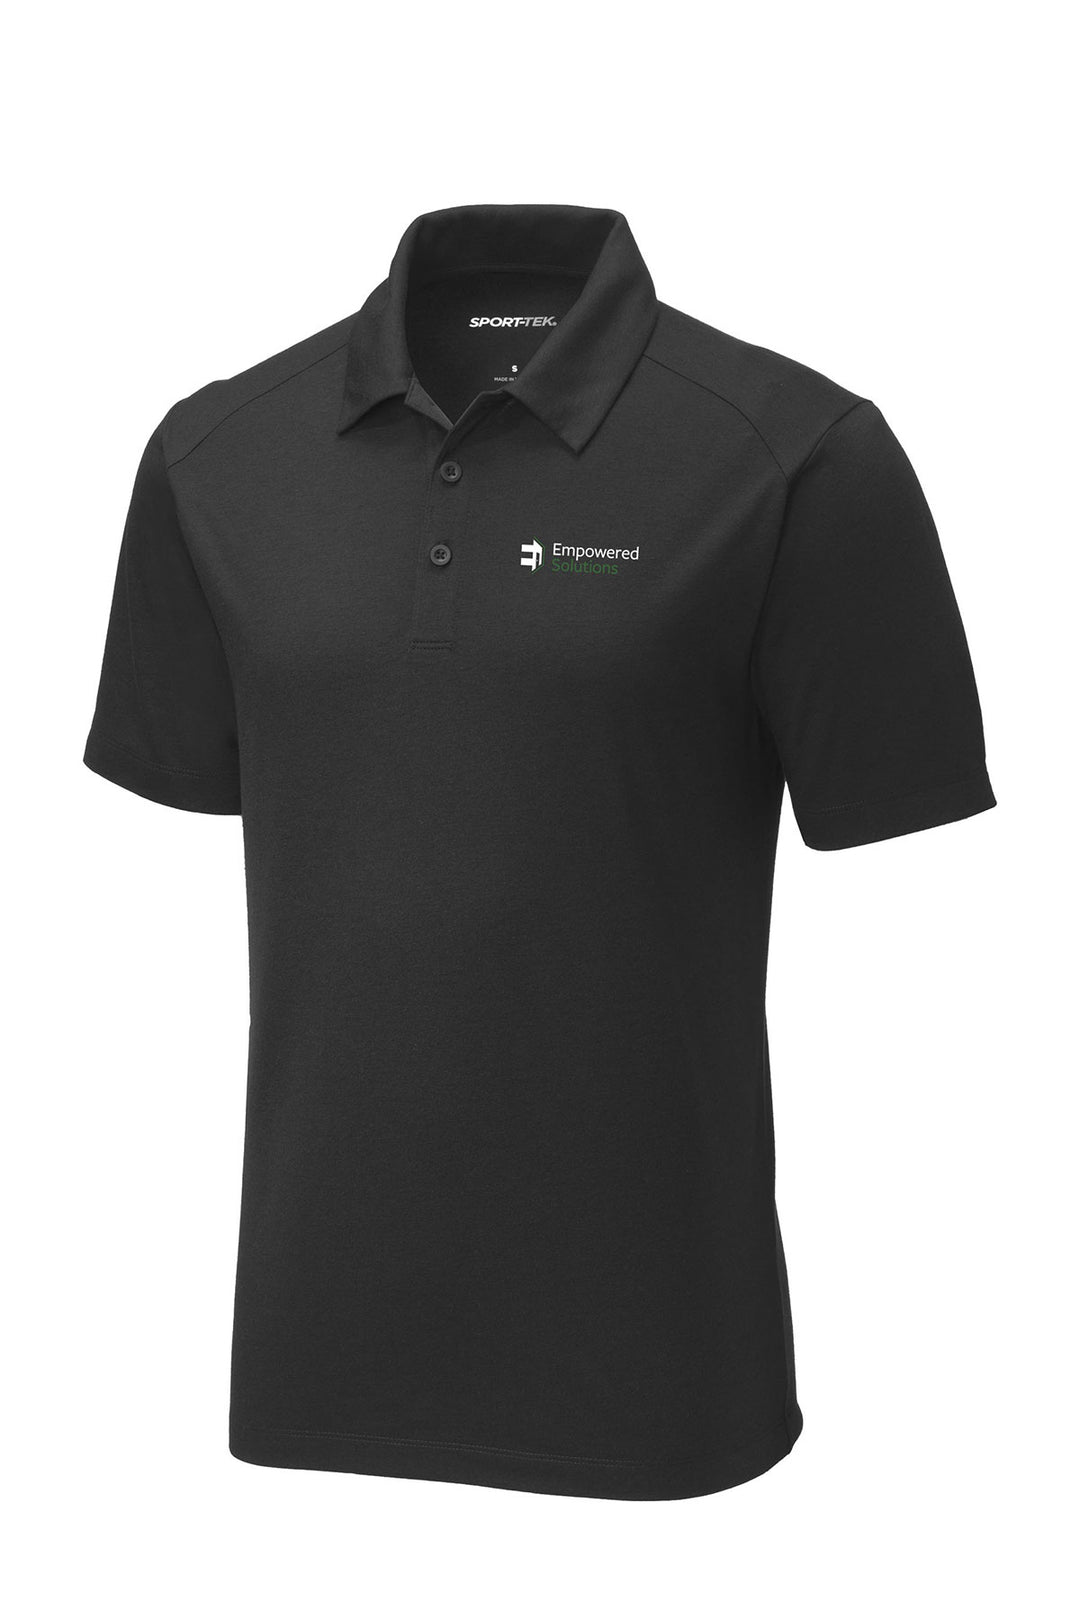 PosiCharge Tri-Blend Wicking Polo- Empowered